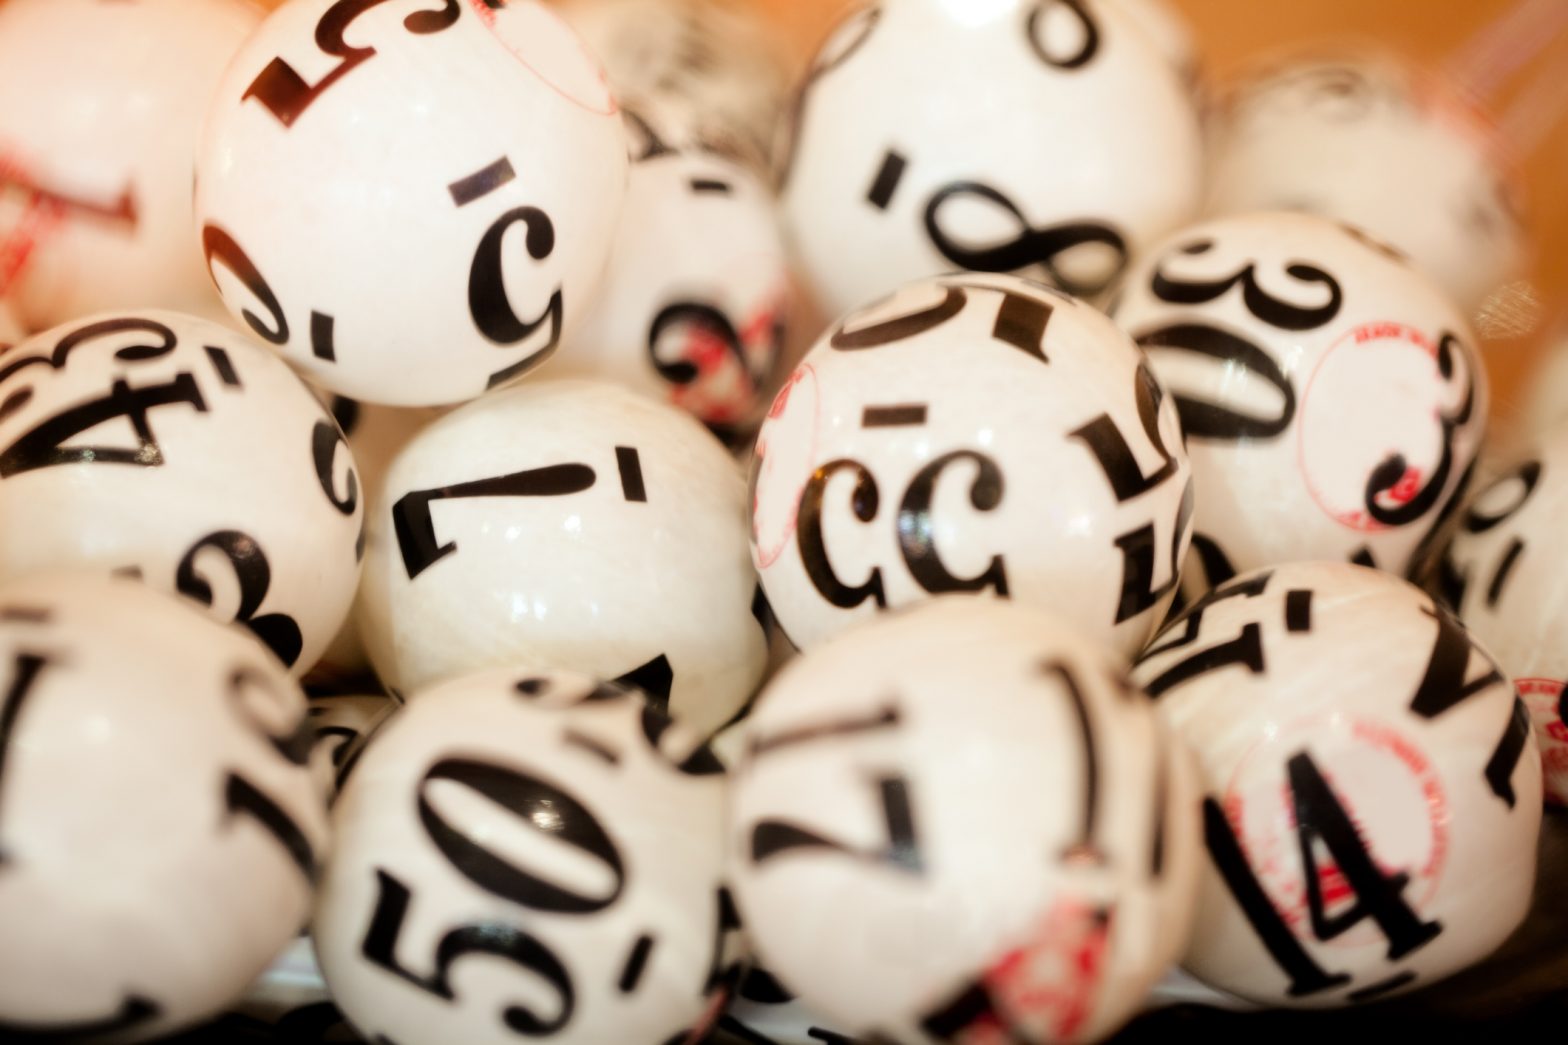 Photo of lottery balls showing some of the numbers that are in the lottery